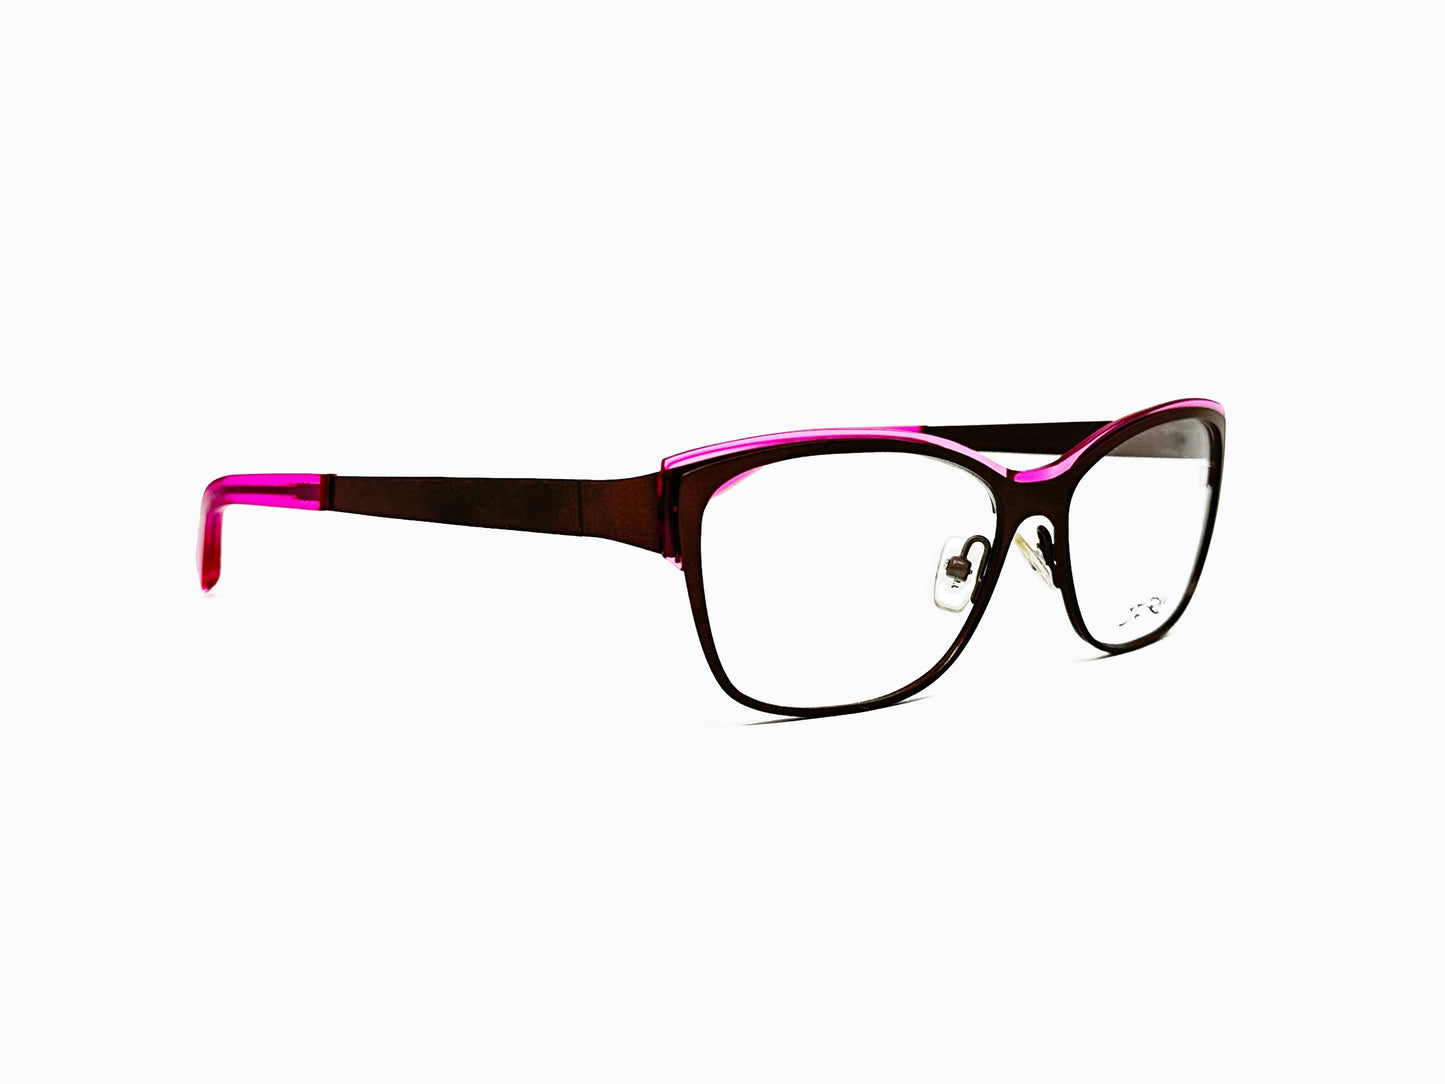 JF Rey rectangular frame. Model: JF2554. Color: 9085 black with pink edge on top and temples. Side view.